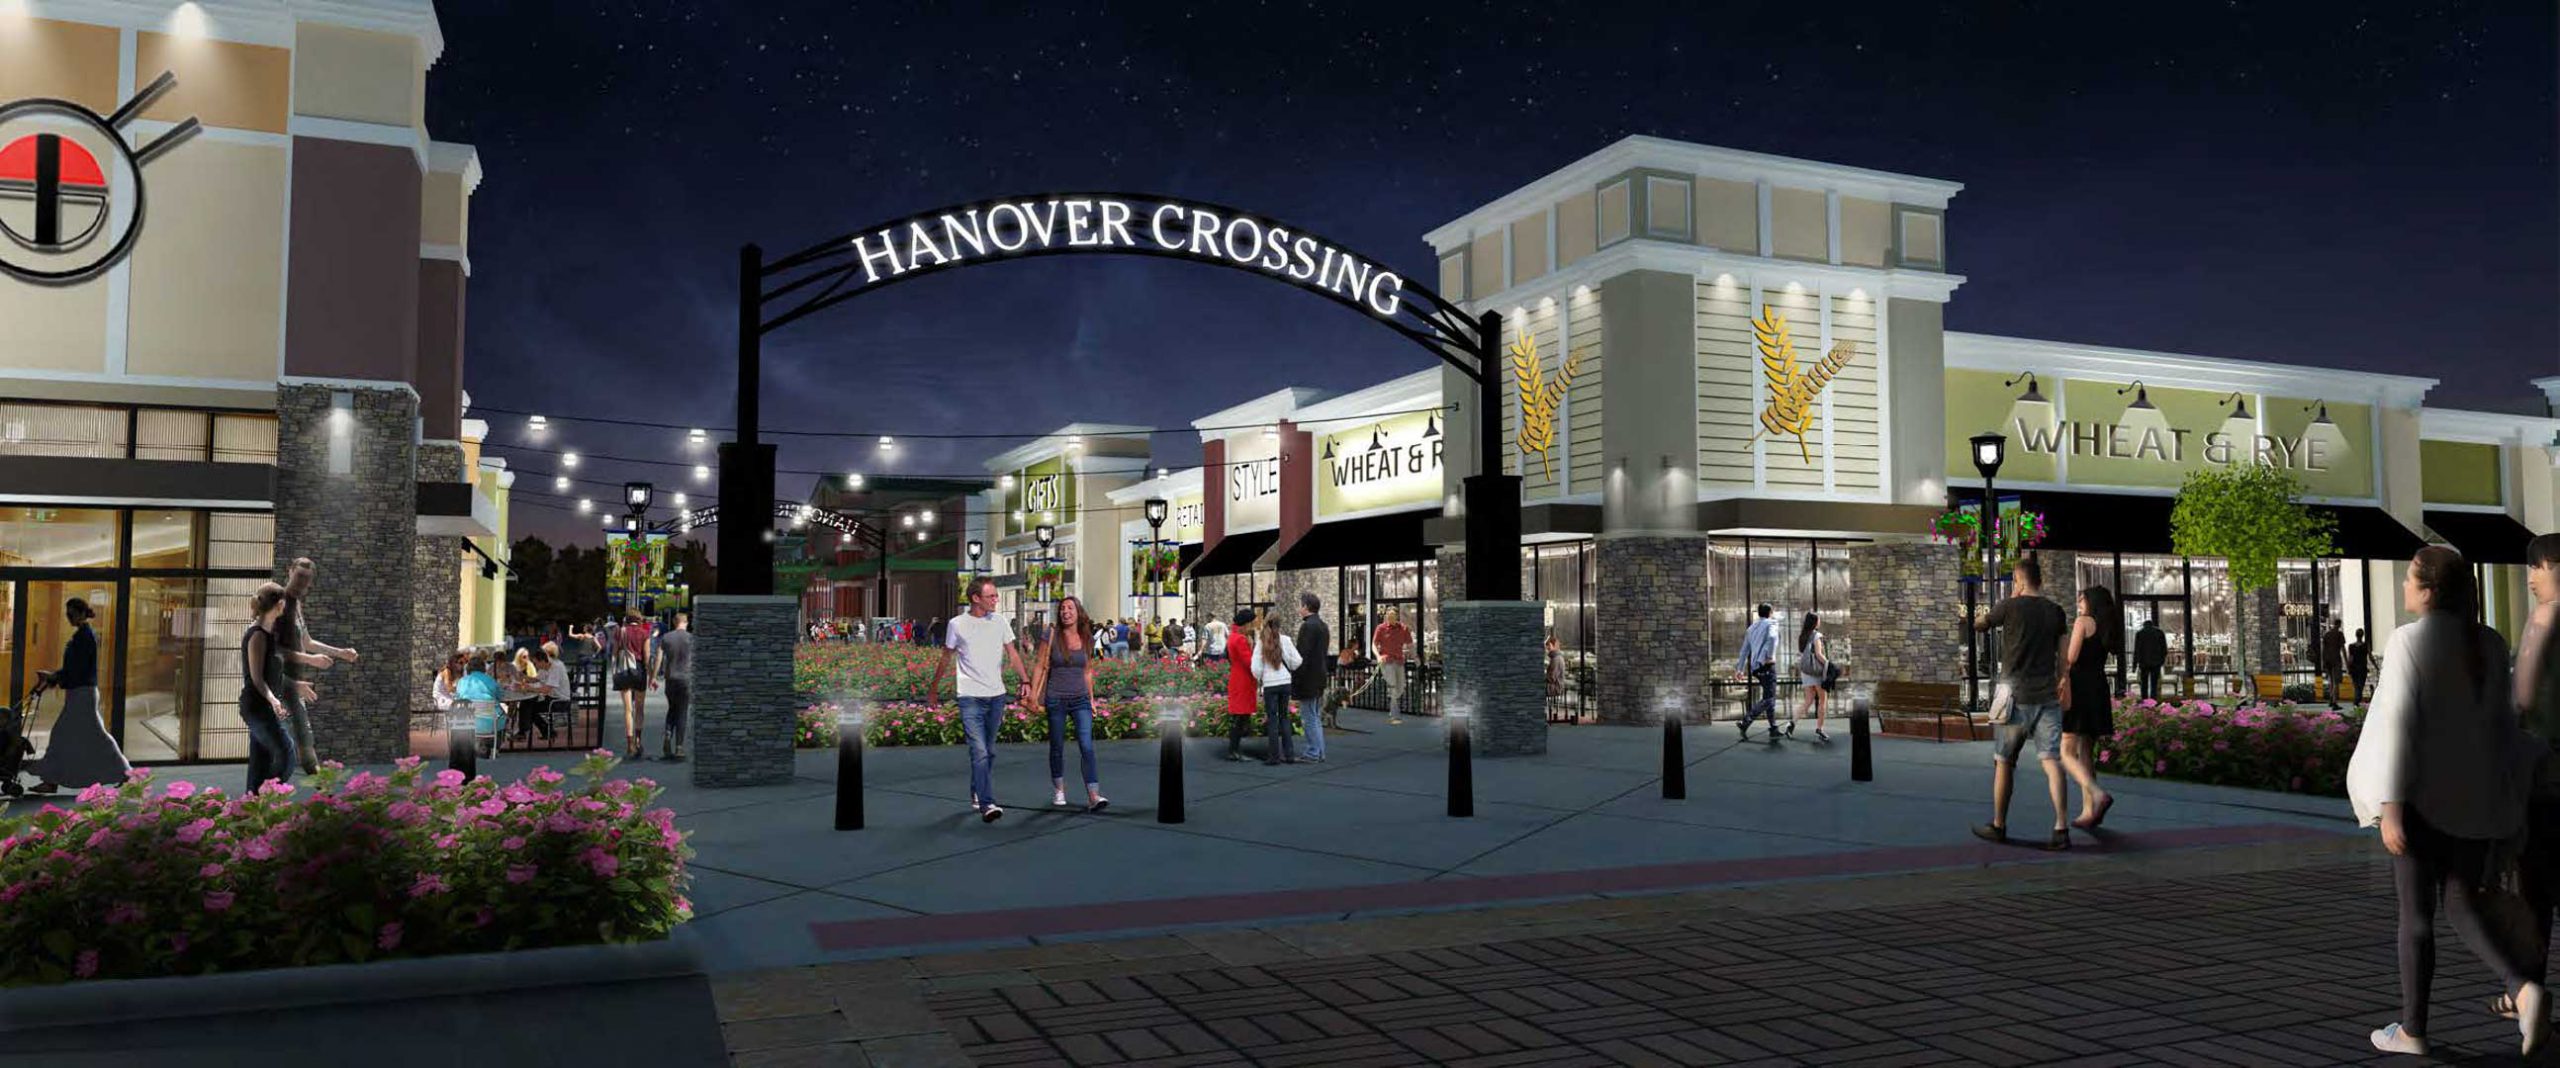 Exterior concept rendering at night